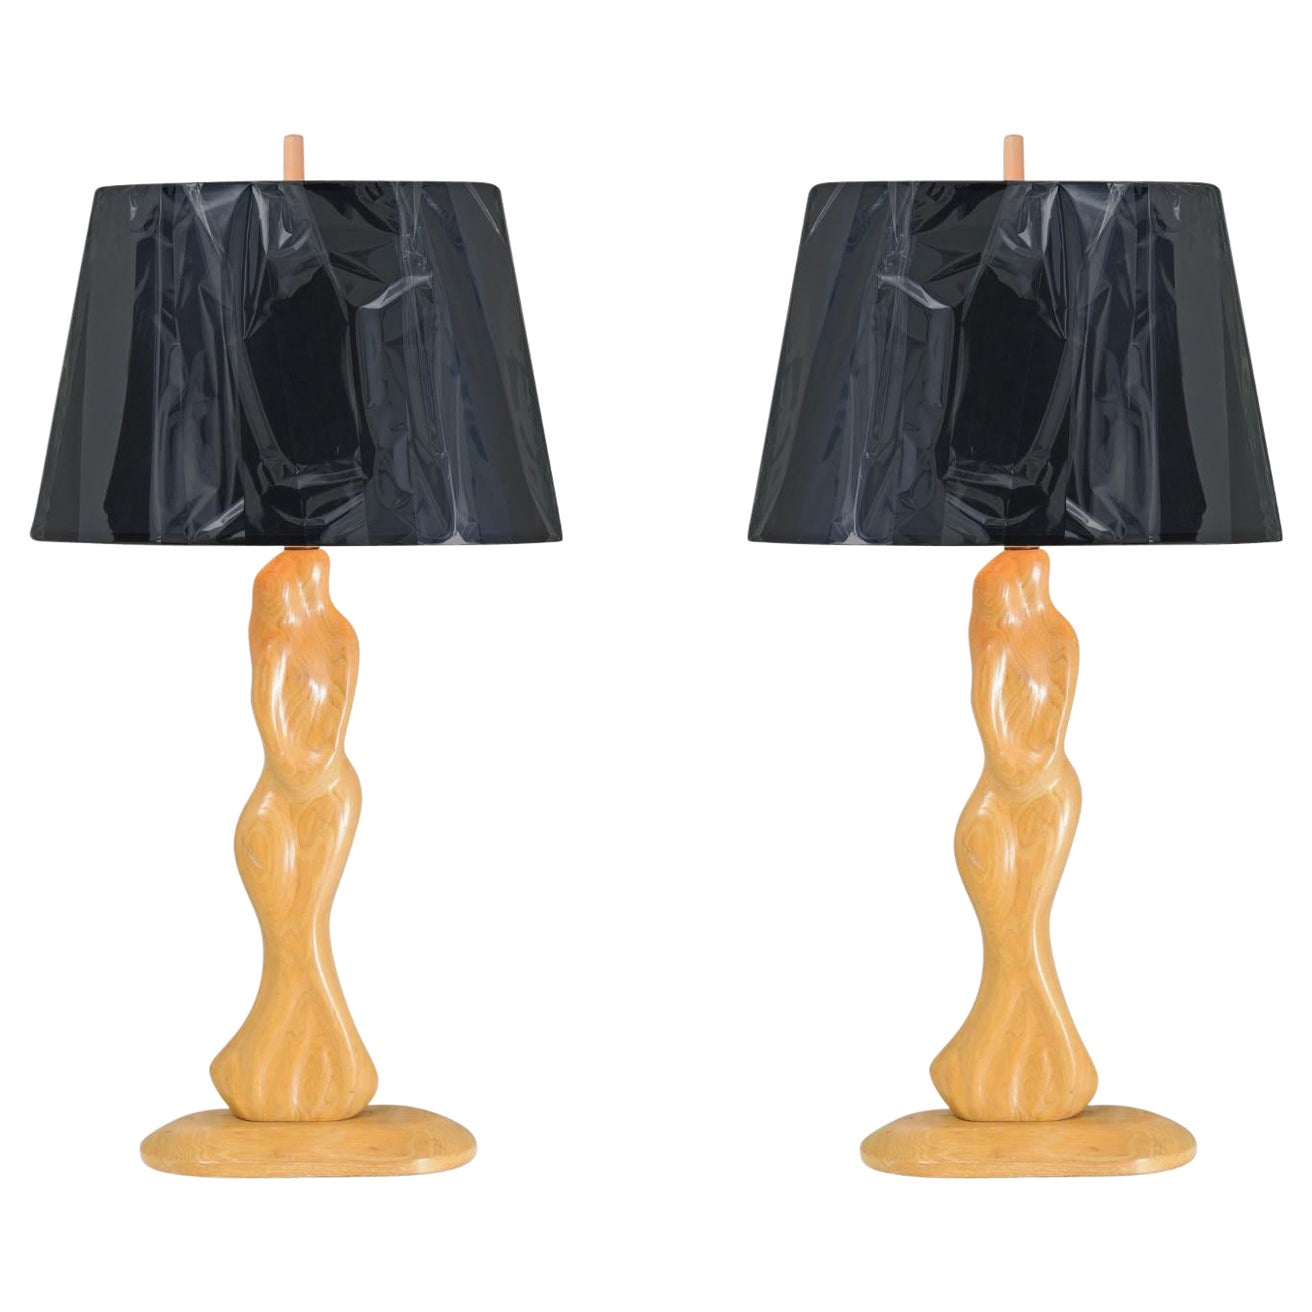 Exquisite Restored Pair of Hand-Carved "Lovers" Lamps by Heifetz, circa 1950 For Sale